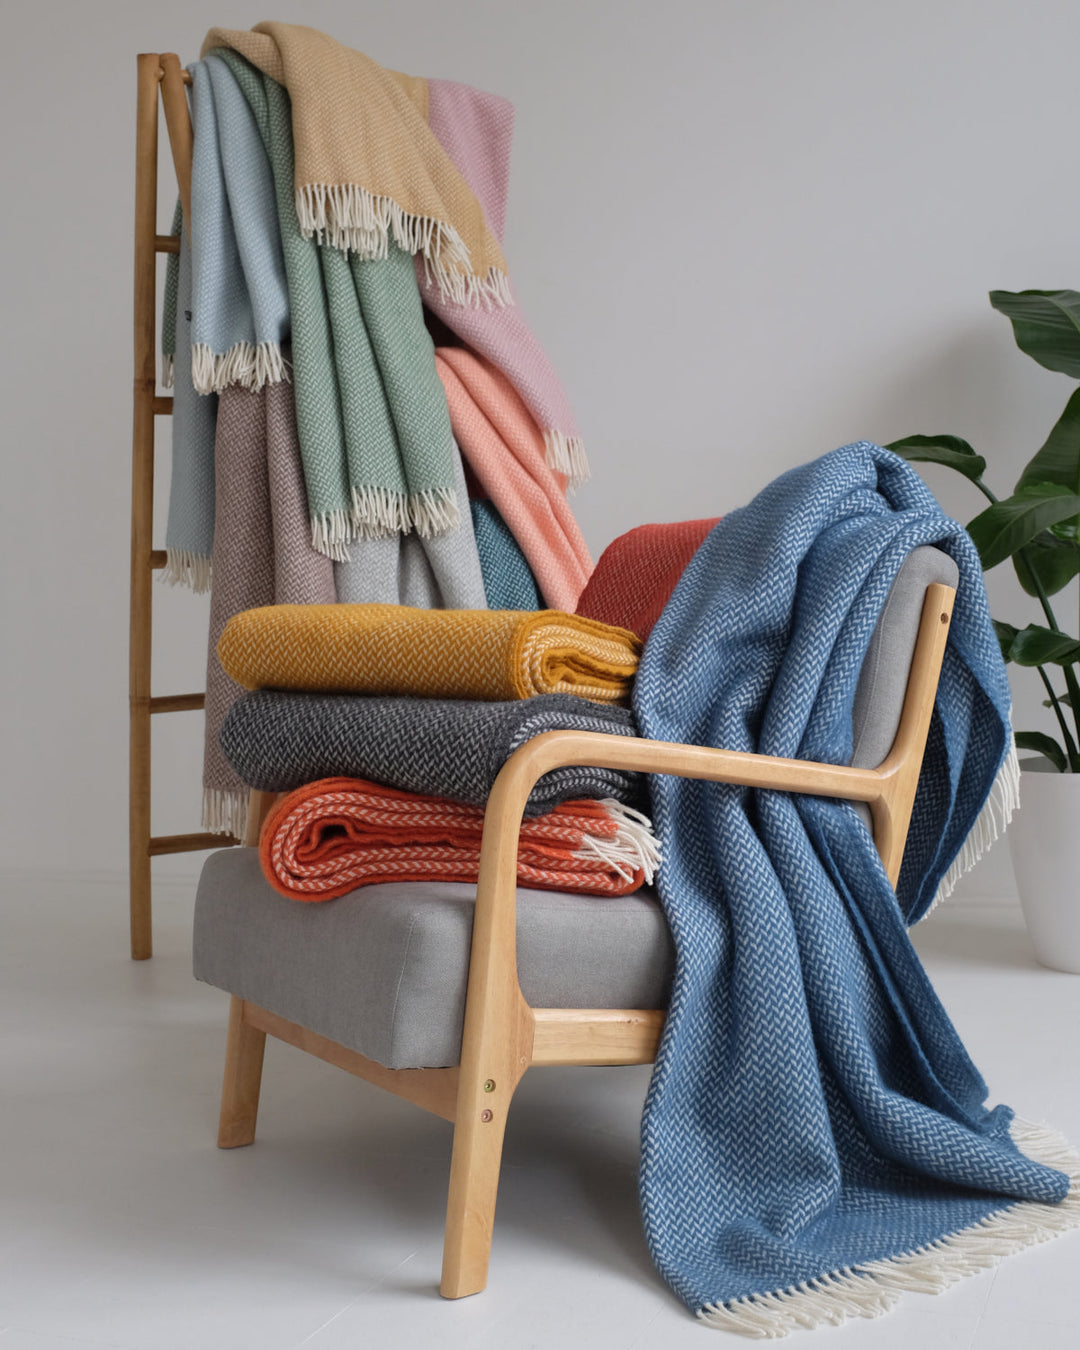 Folded wool blankets stacked on a lounge chair. Several wool throws are hanging on a wooden ladder behind the chair